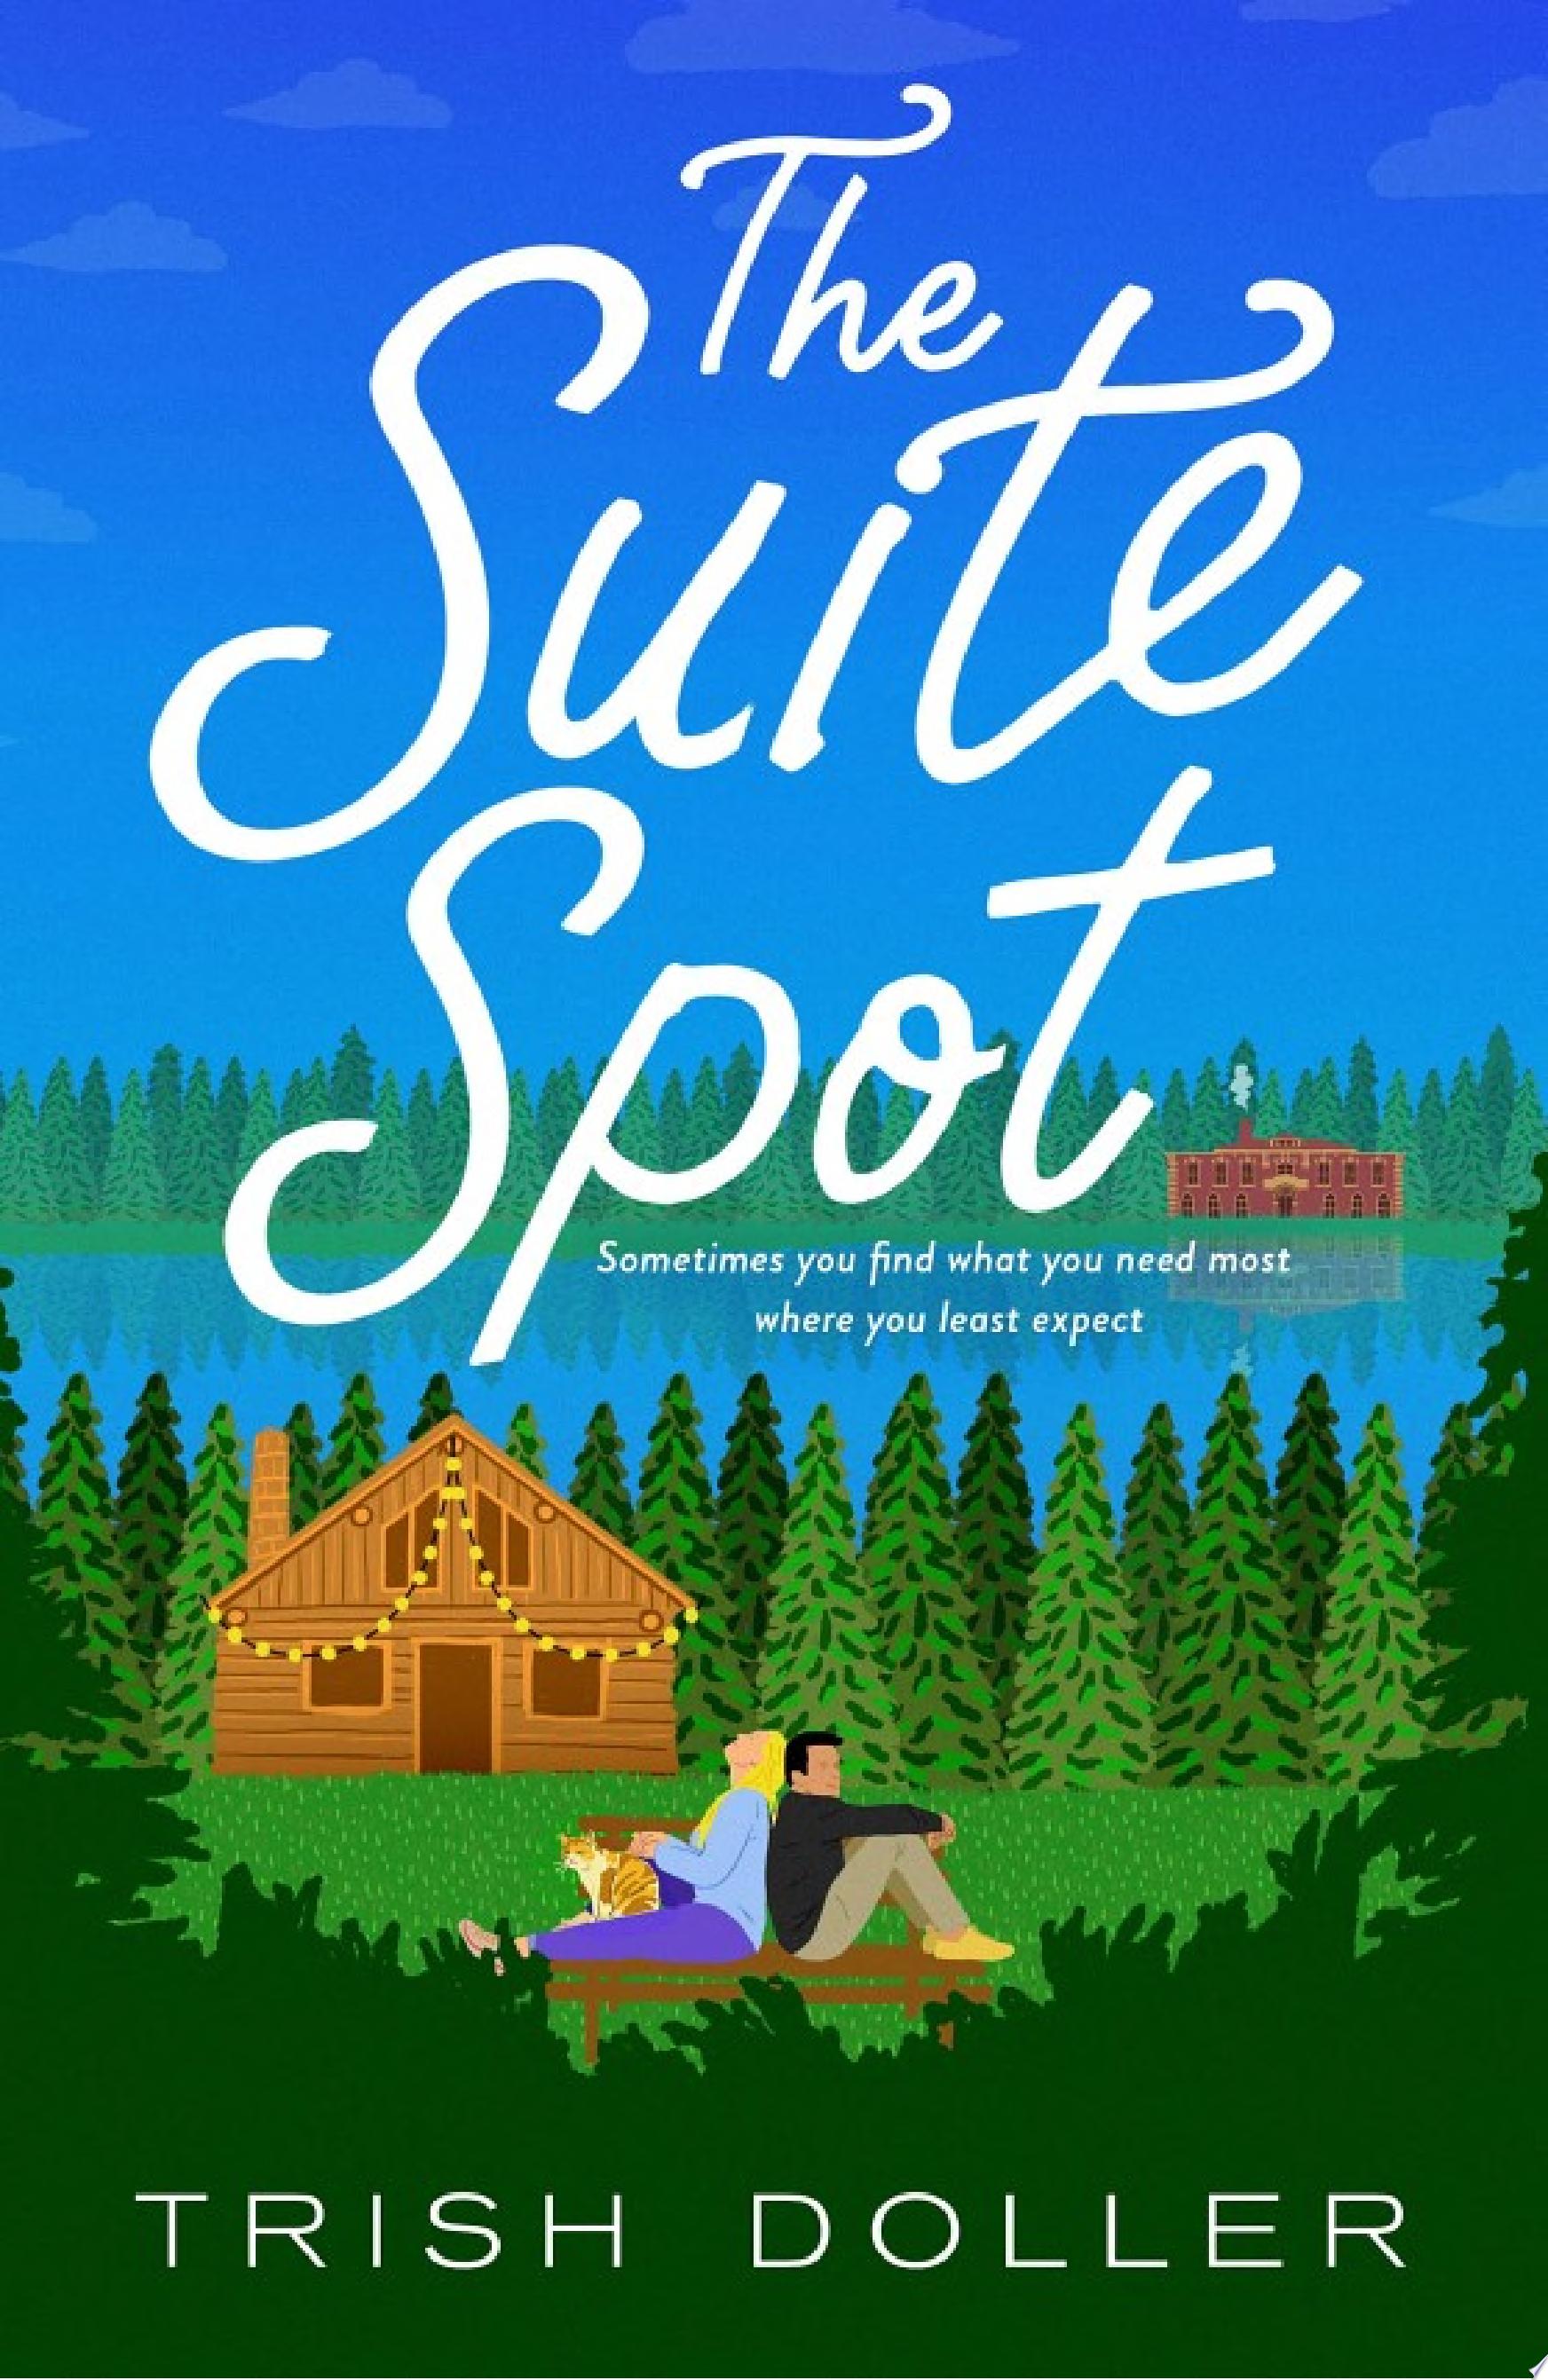 Image for "The Suite Spot"